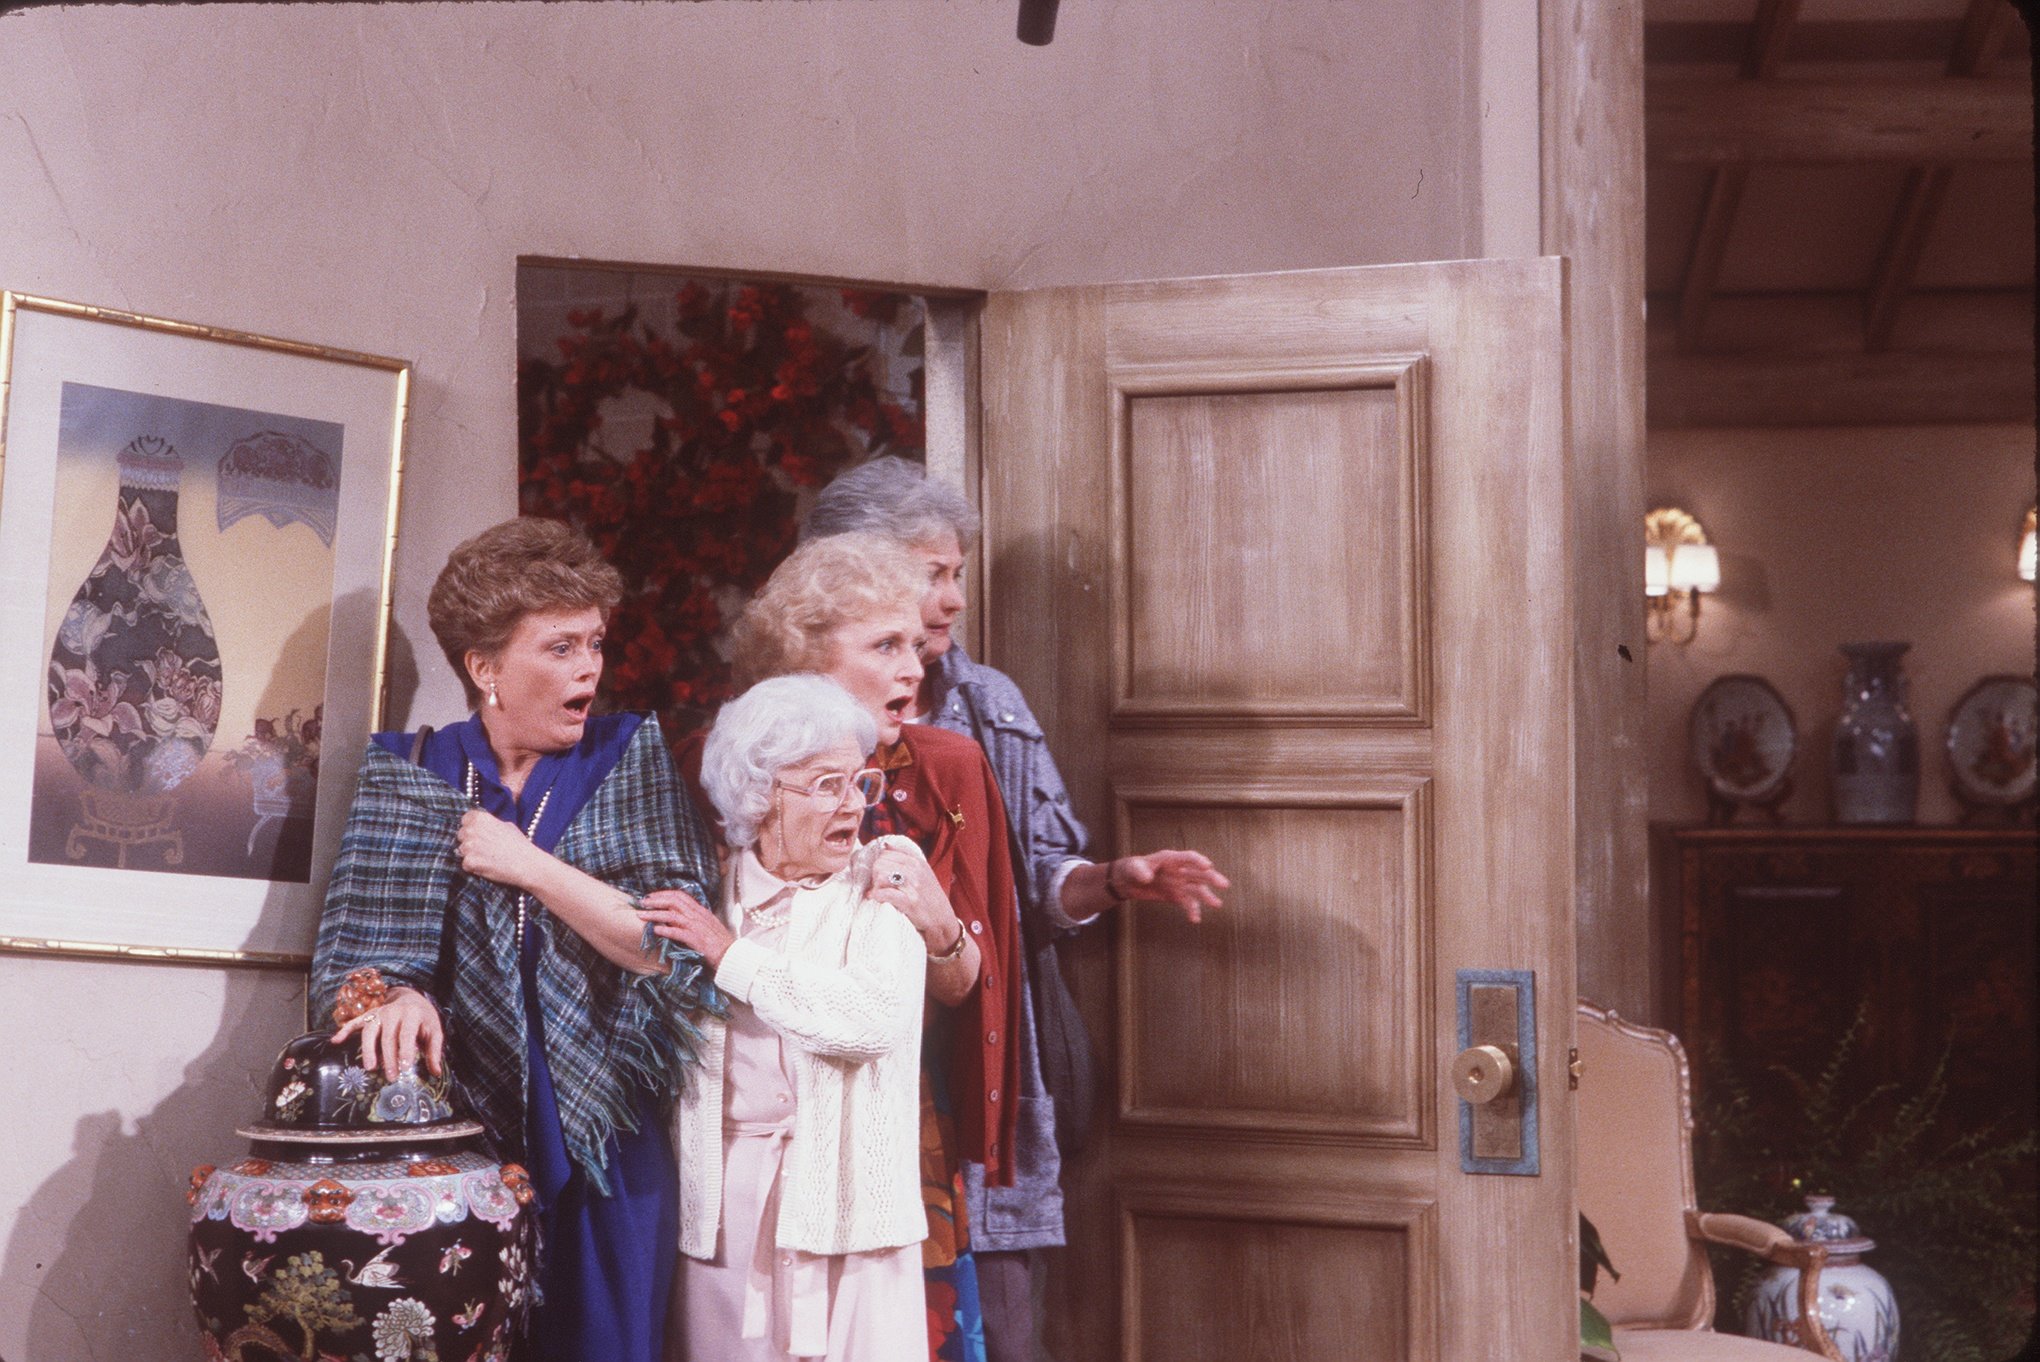 Golden Girls' is back — but for some, it never left